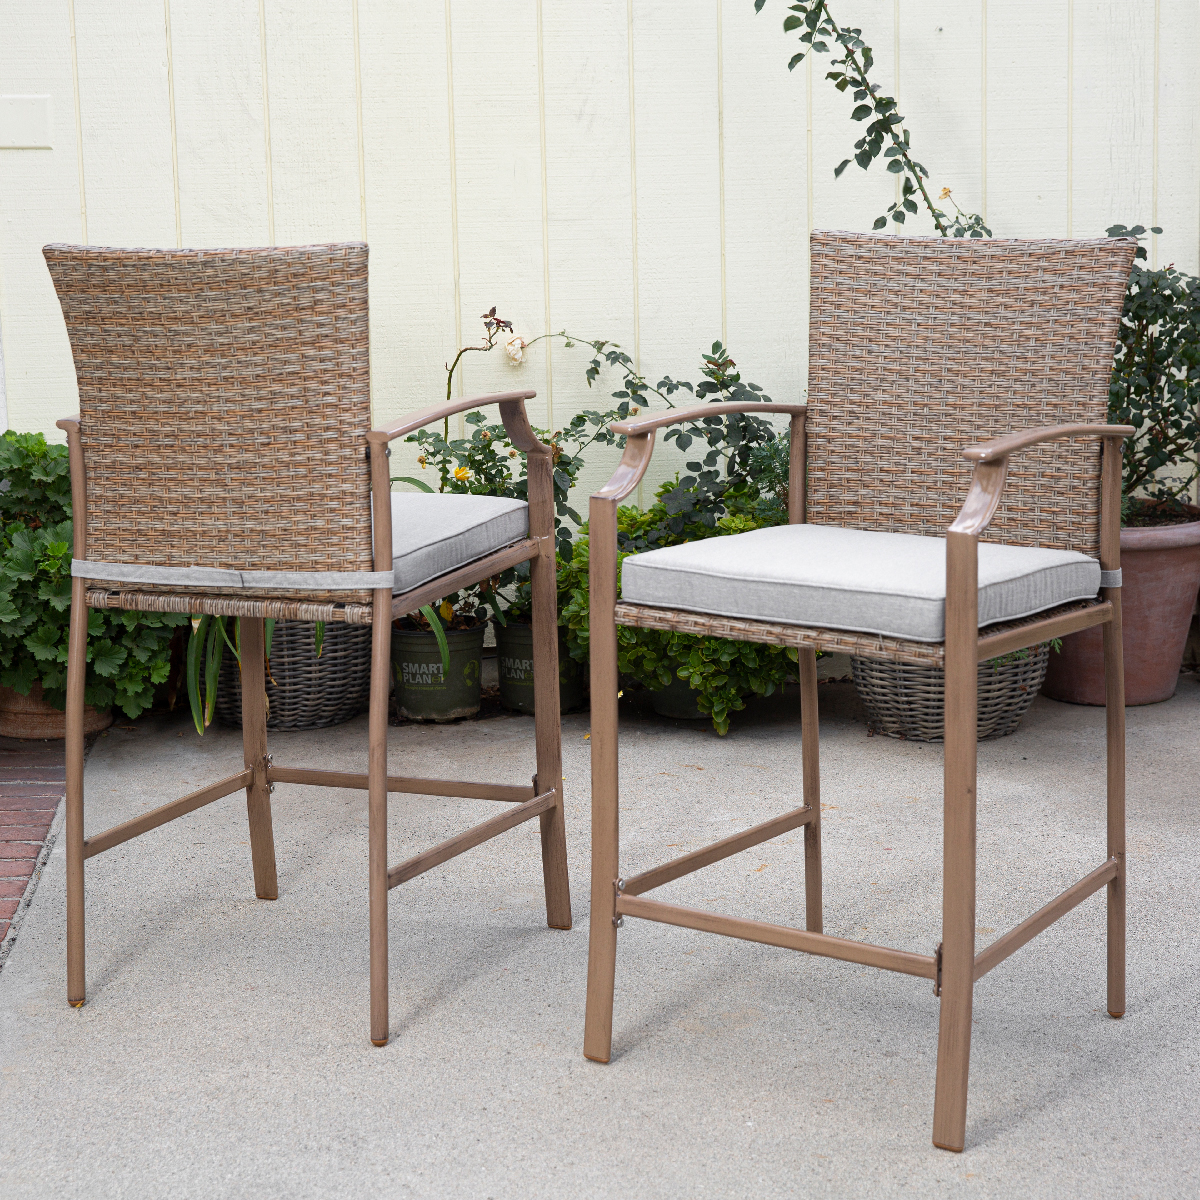 3PCS Outdoor Patio Rattan Wicker Bar Table Stools Dining Set Cushioned Chairs Garden, Beige/Grey - image 5 of 7